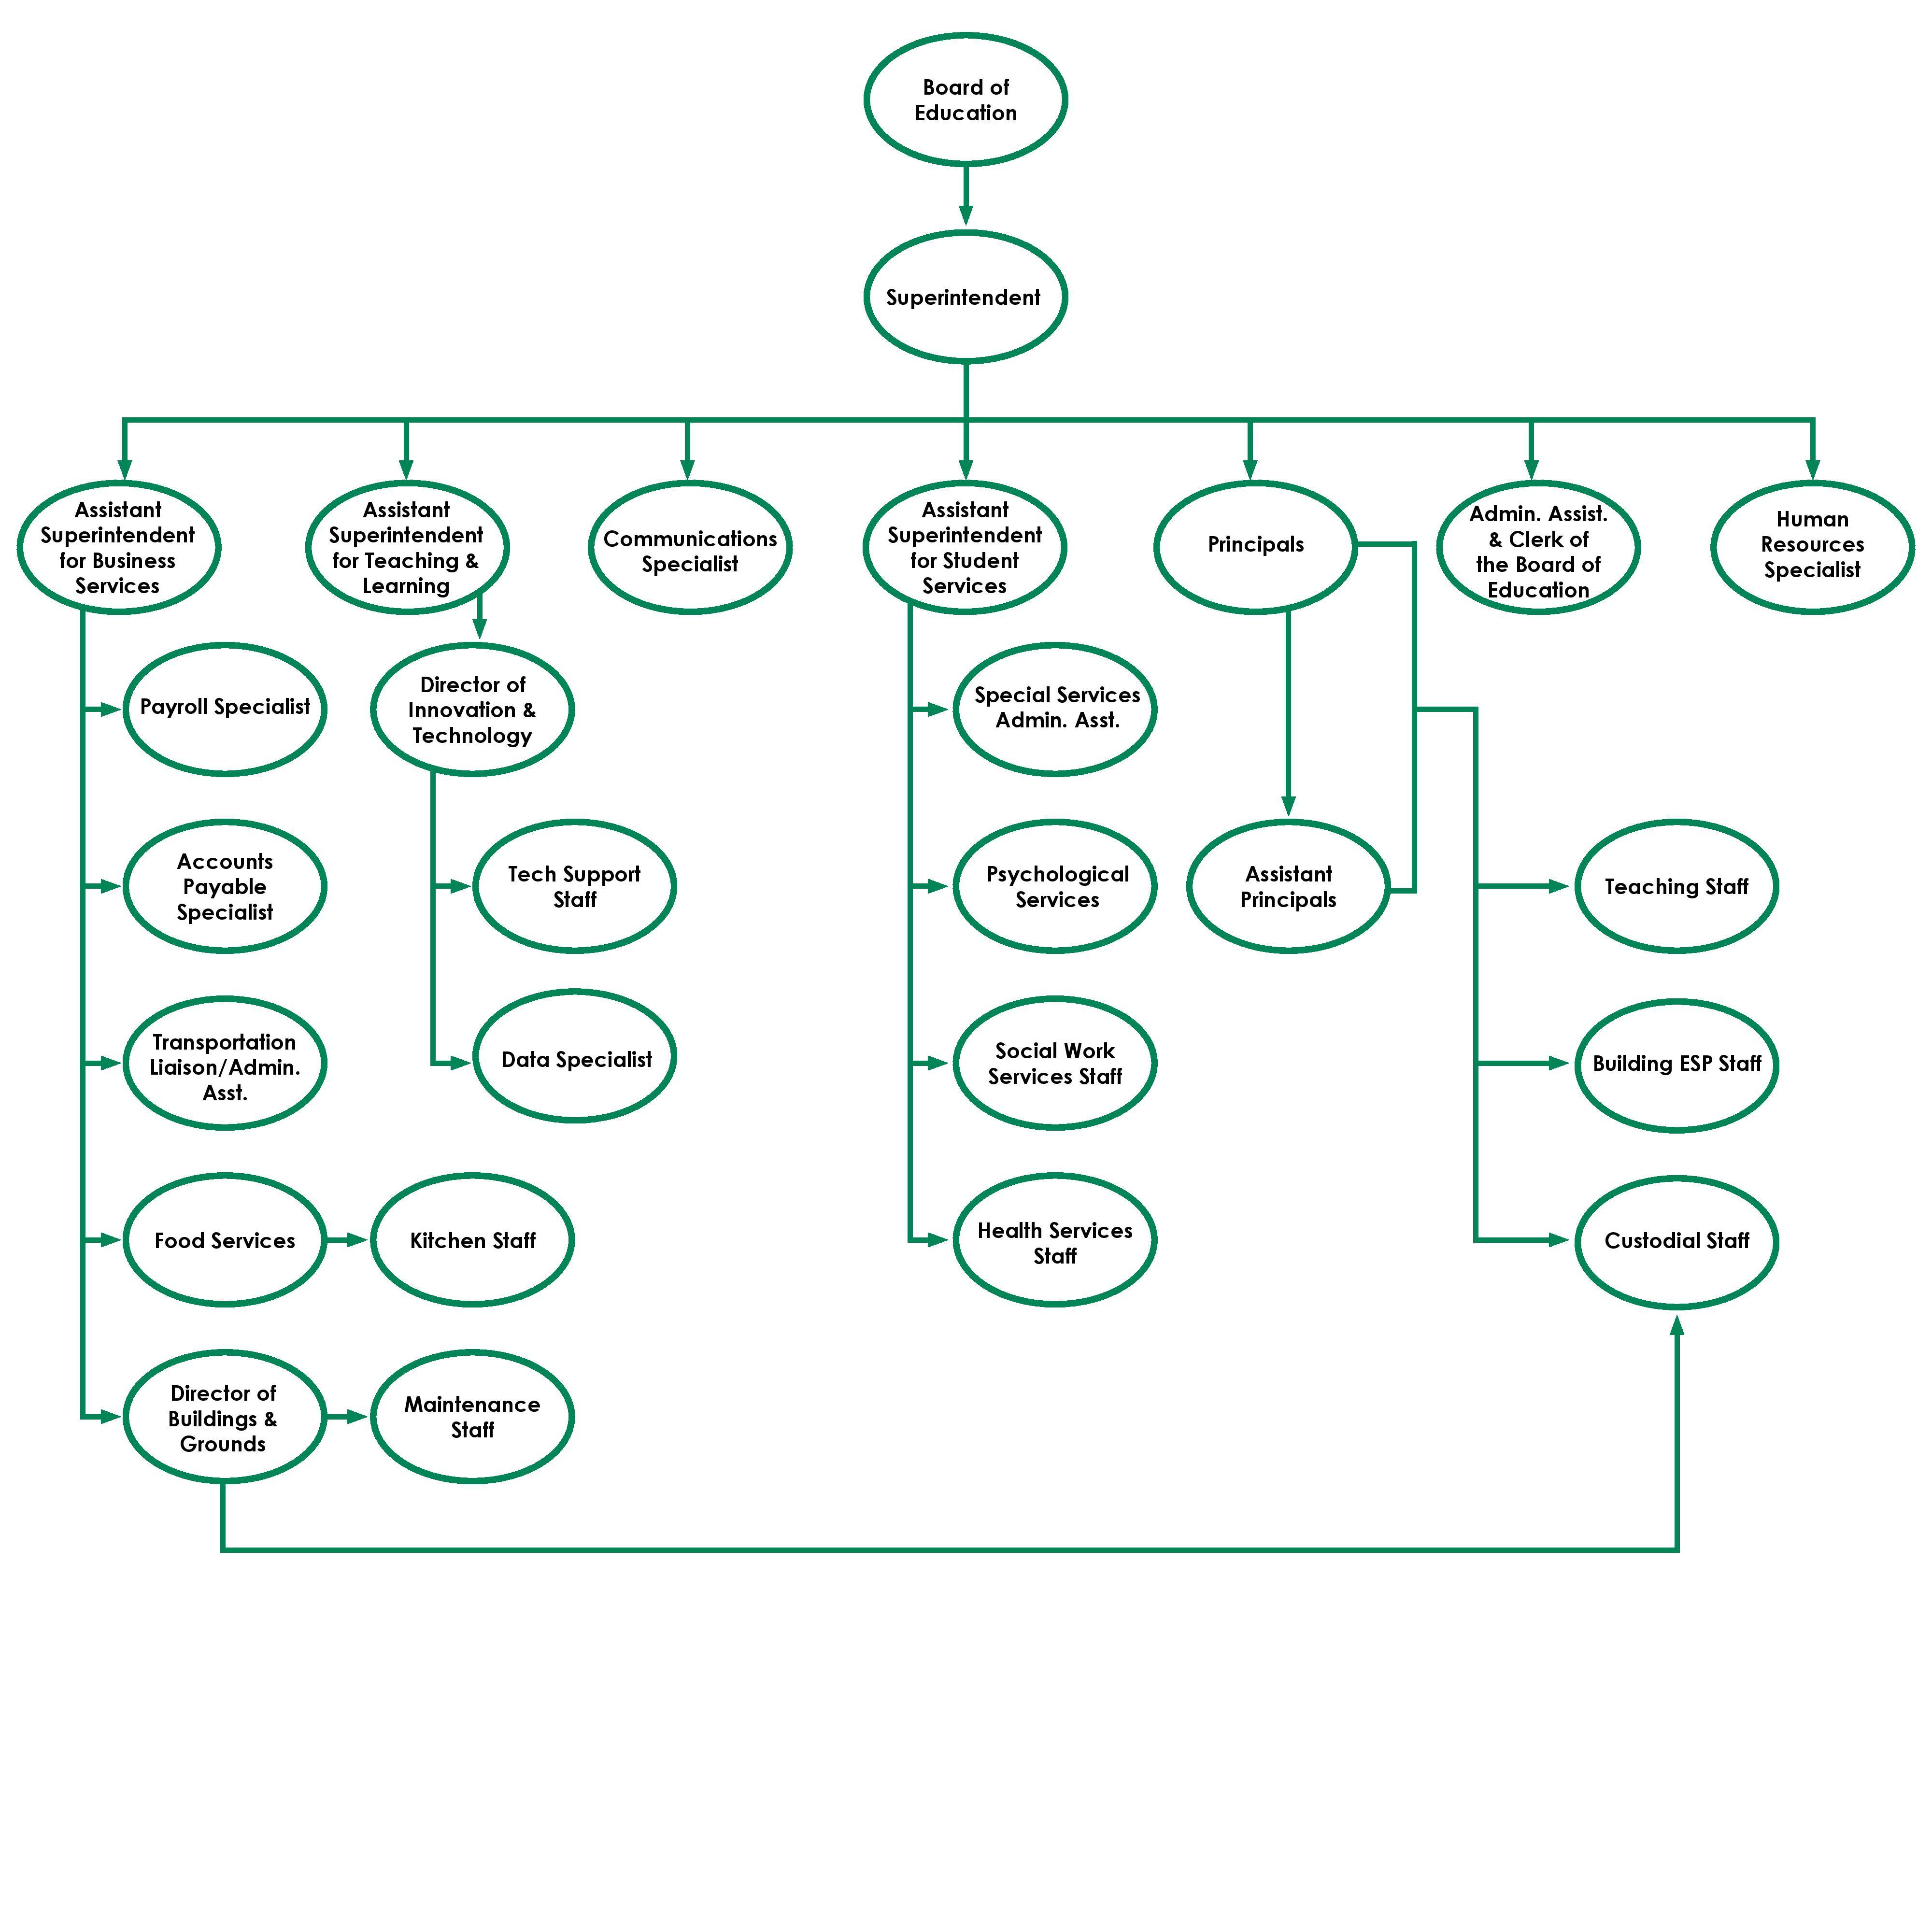 Organizational Chart depicting District Staffing